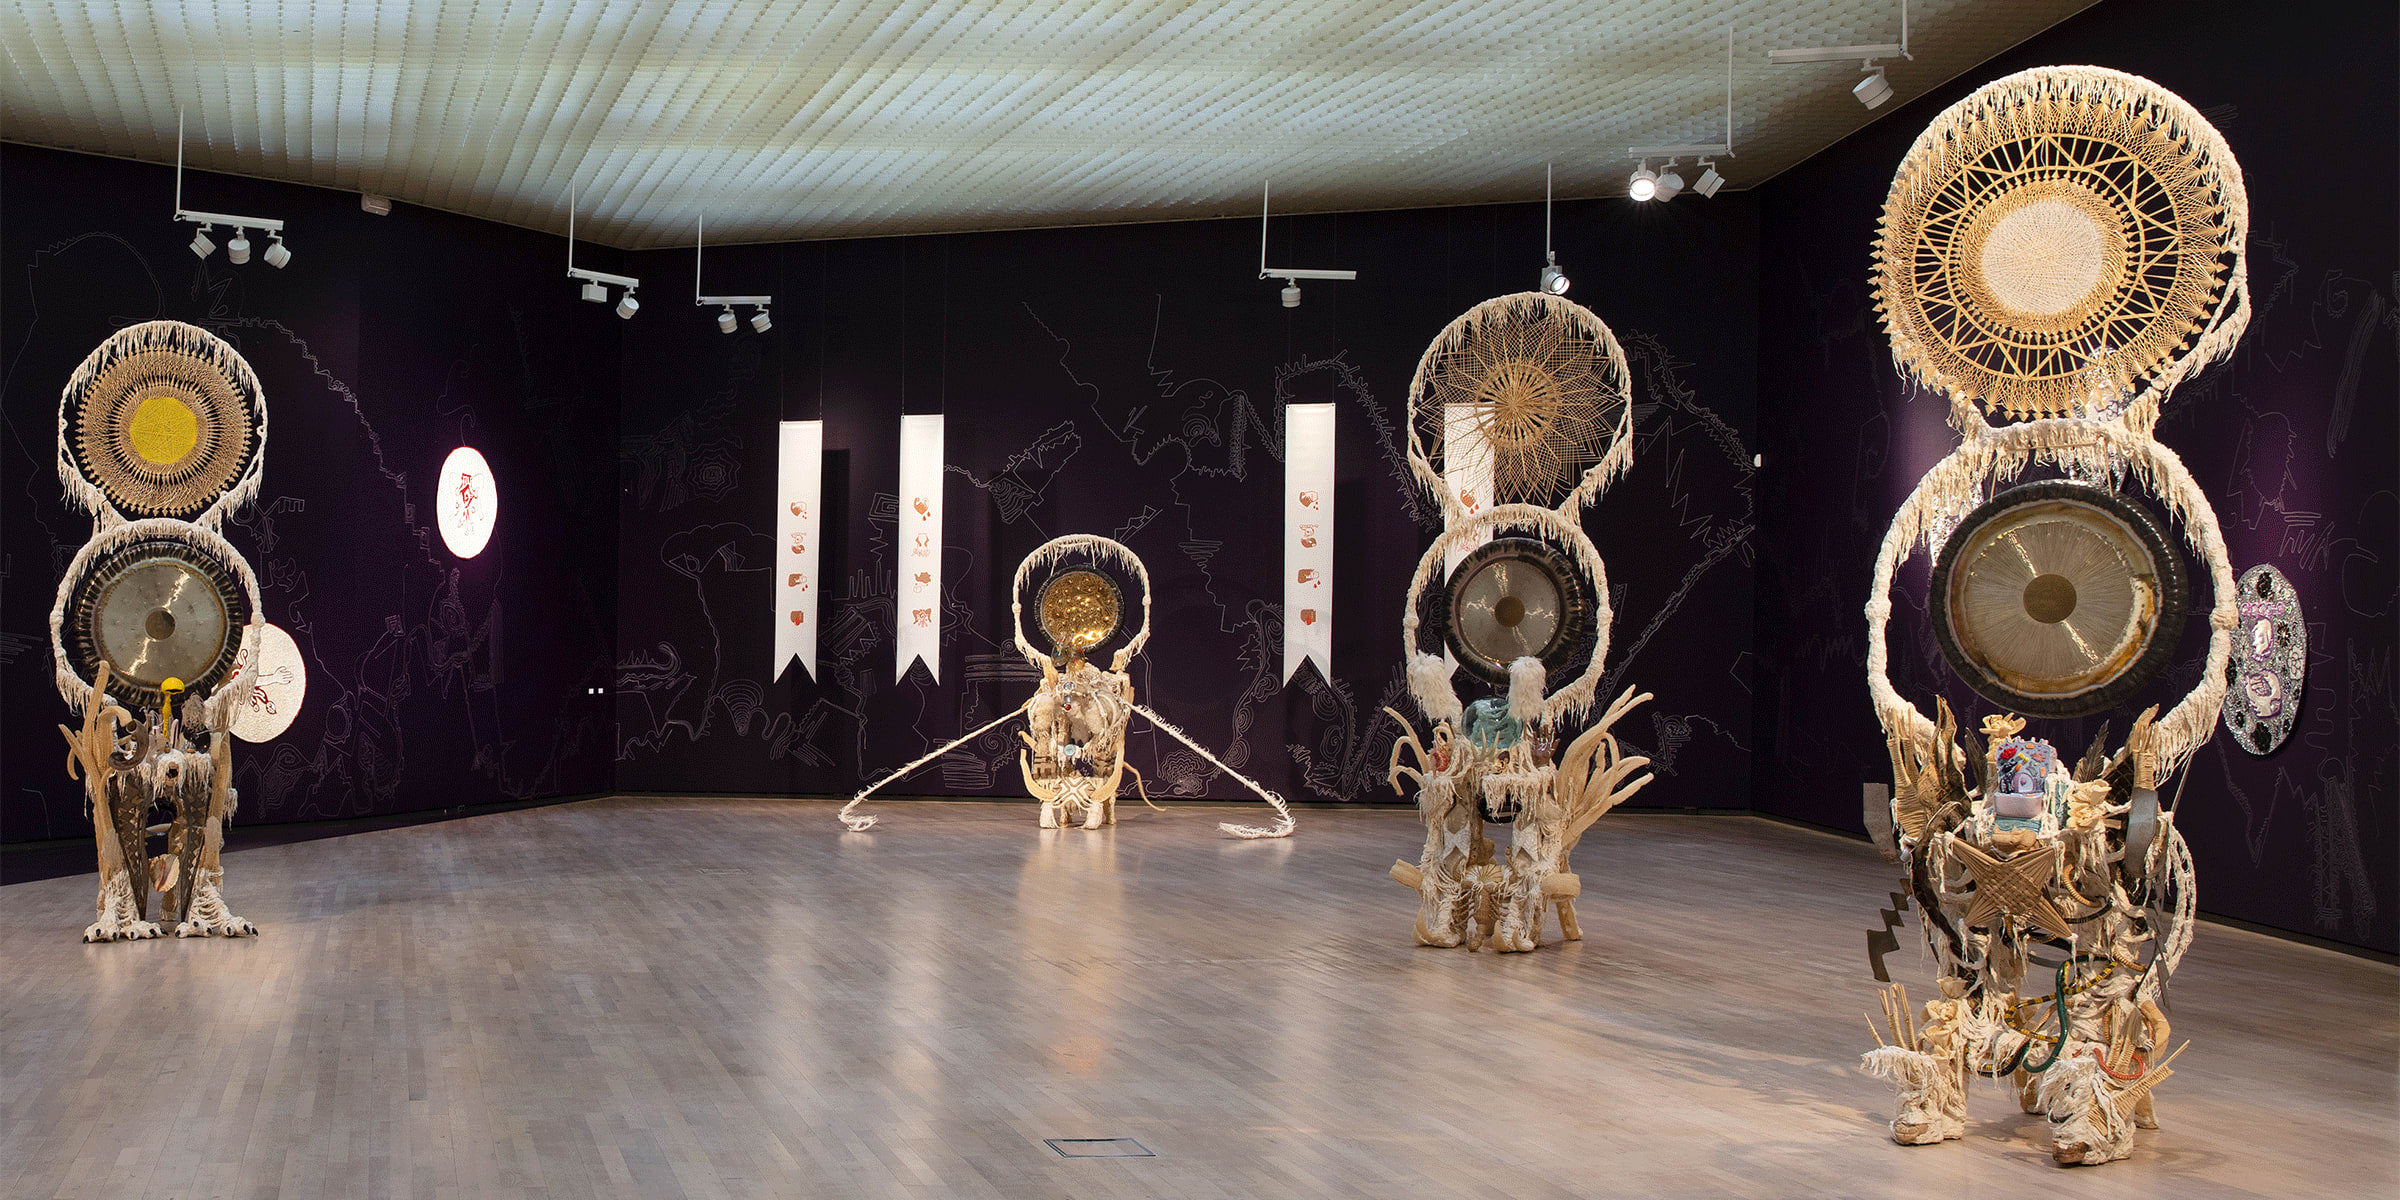 Installation view of Guadalupe Maravilla’s exhibition ‘Sound Botánica’, Henie Onstad Kunstsenter, Høvikodden, 2022. Photograph by Christian Tunge. Courtesy of the artist, P·P·O·W, and Henie Onstad Kunstsenter.